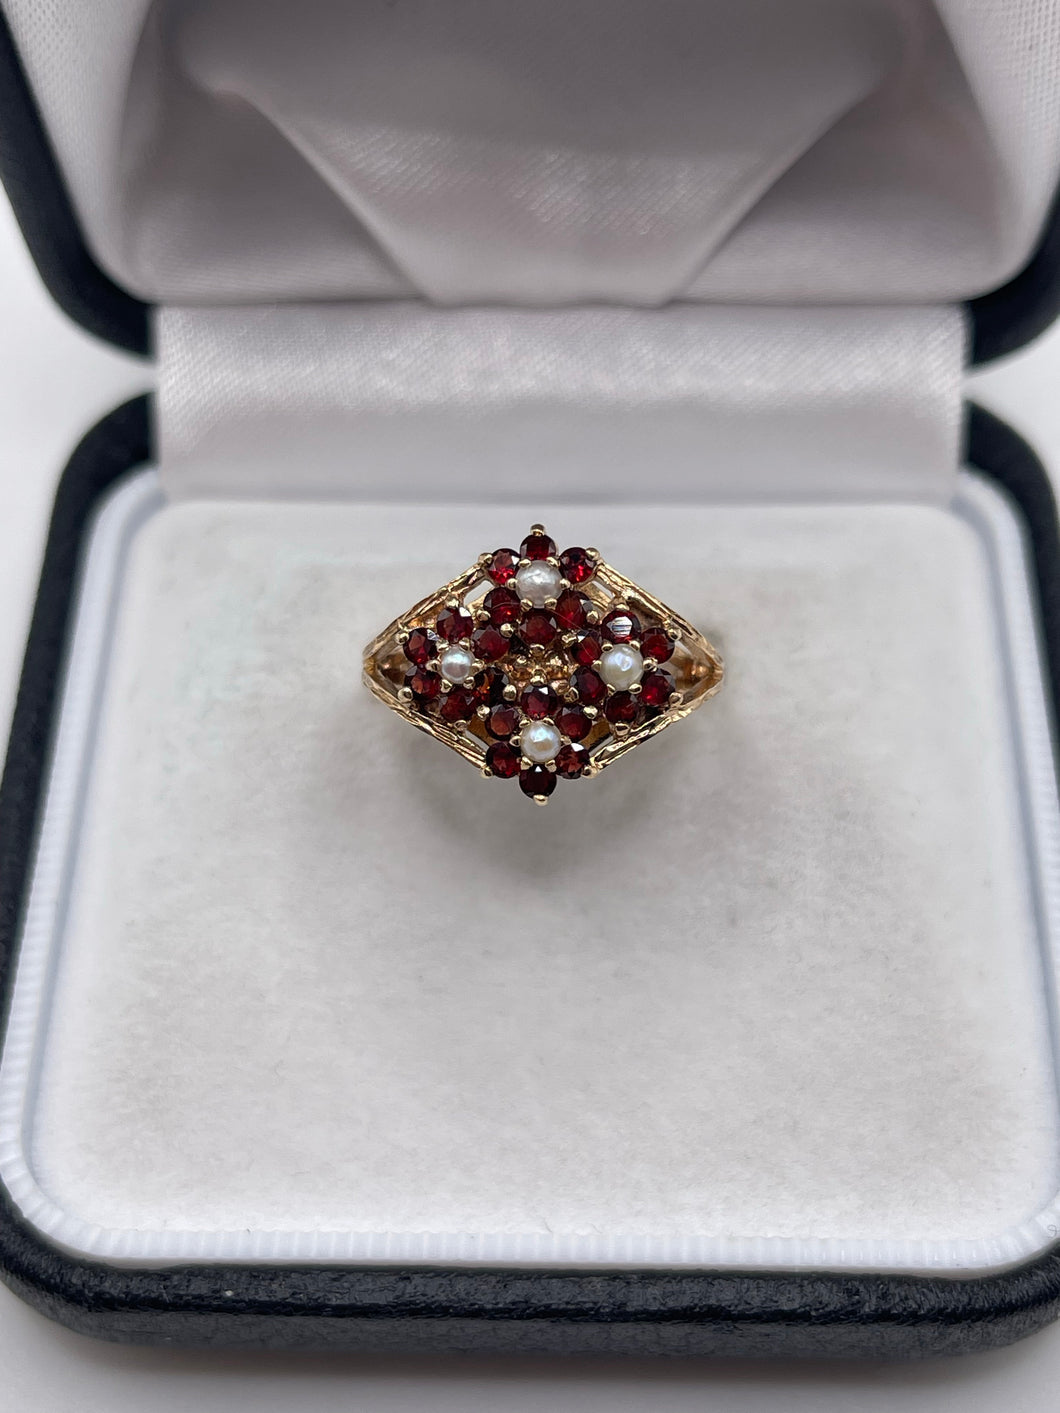 9ct gold garnet and pearl ring